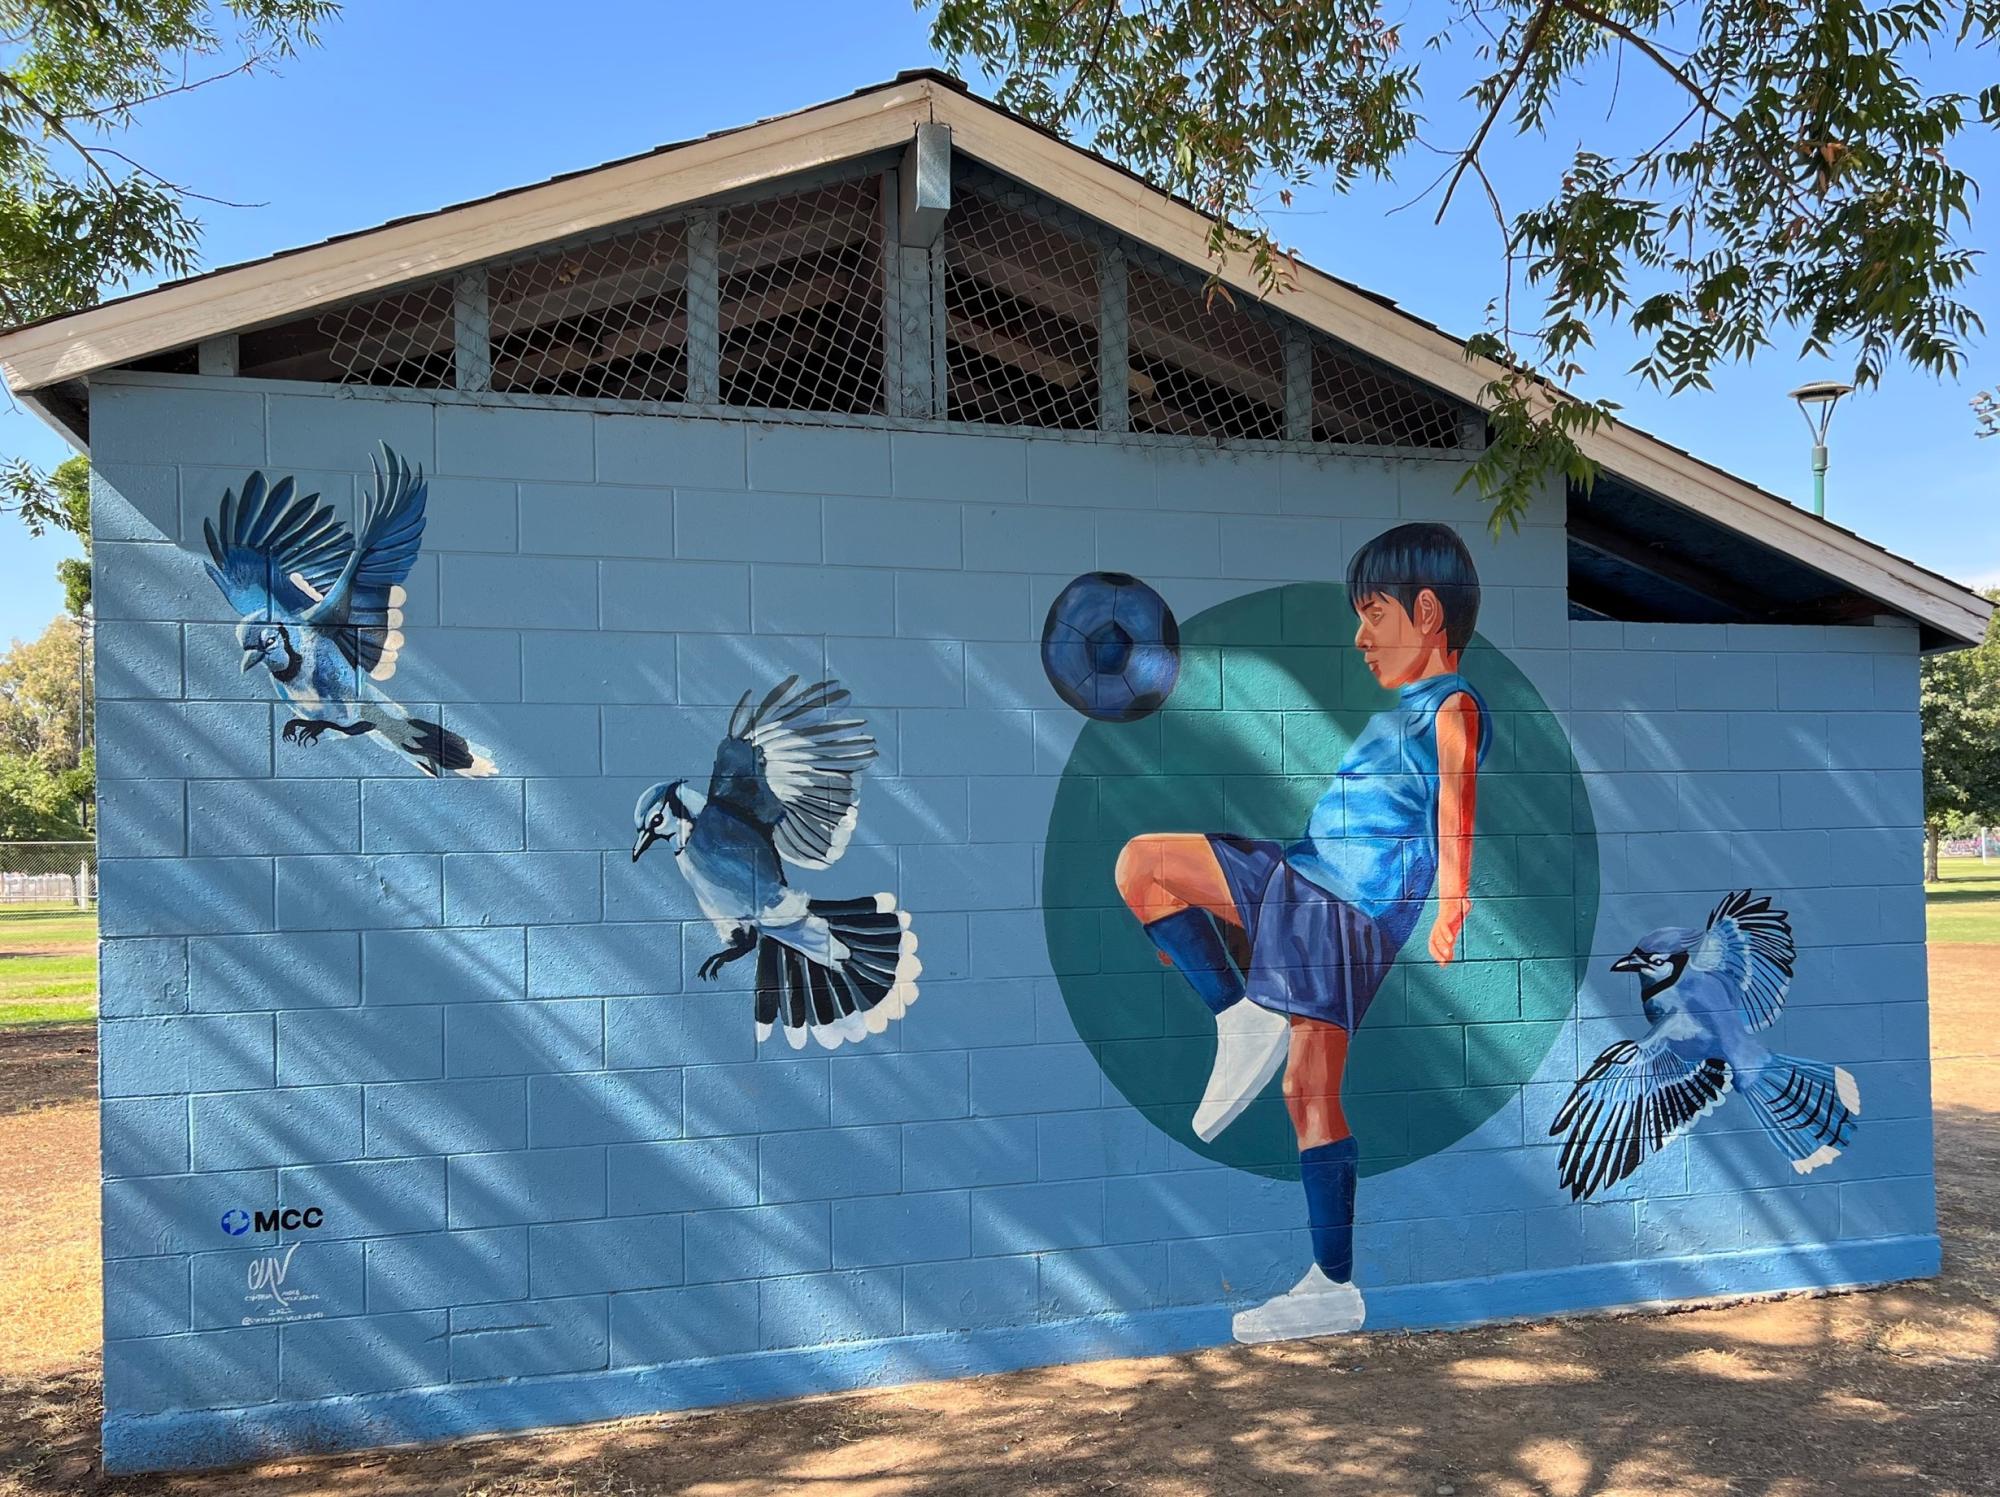 A mural of a child playing soccer. There are also birds taking flight.